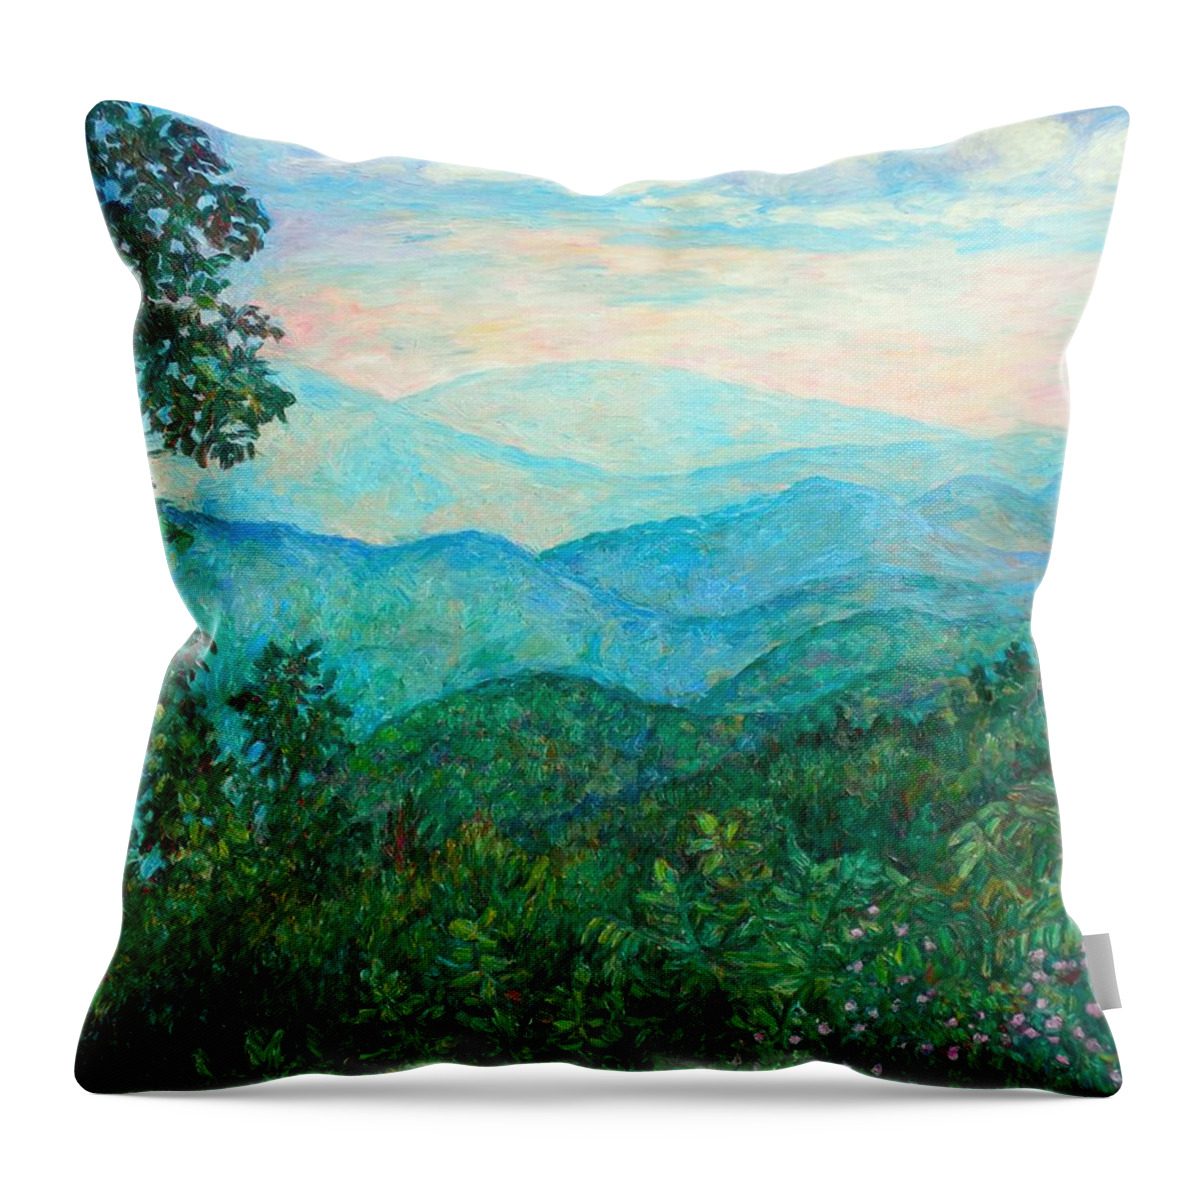 Landscape Throw Pillow featuring the painting Near Purgatory by Kendall Kessler